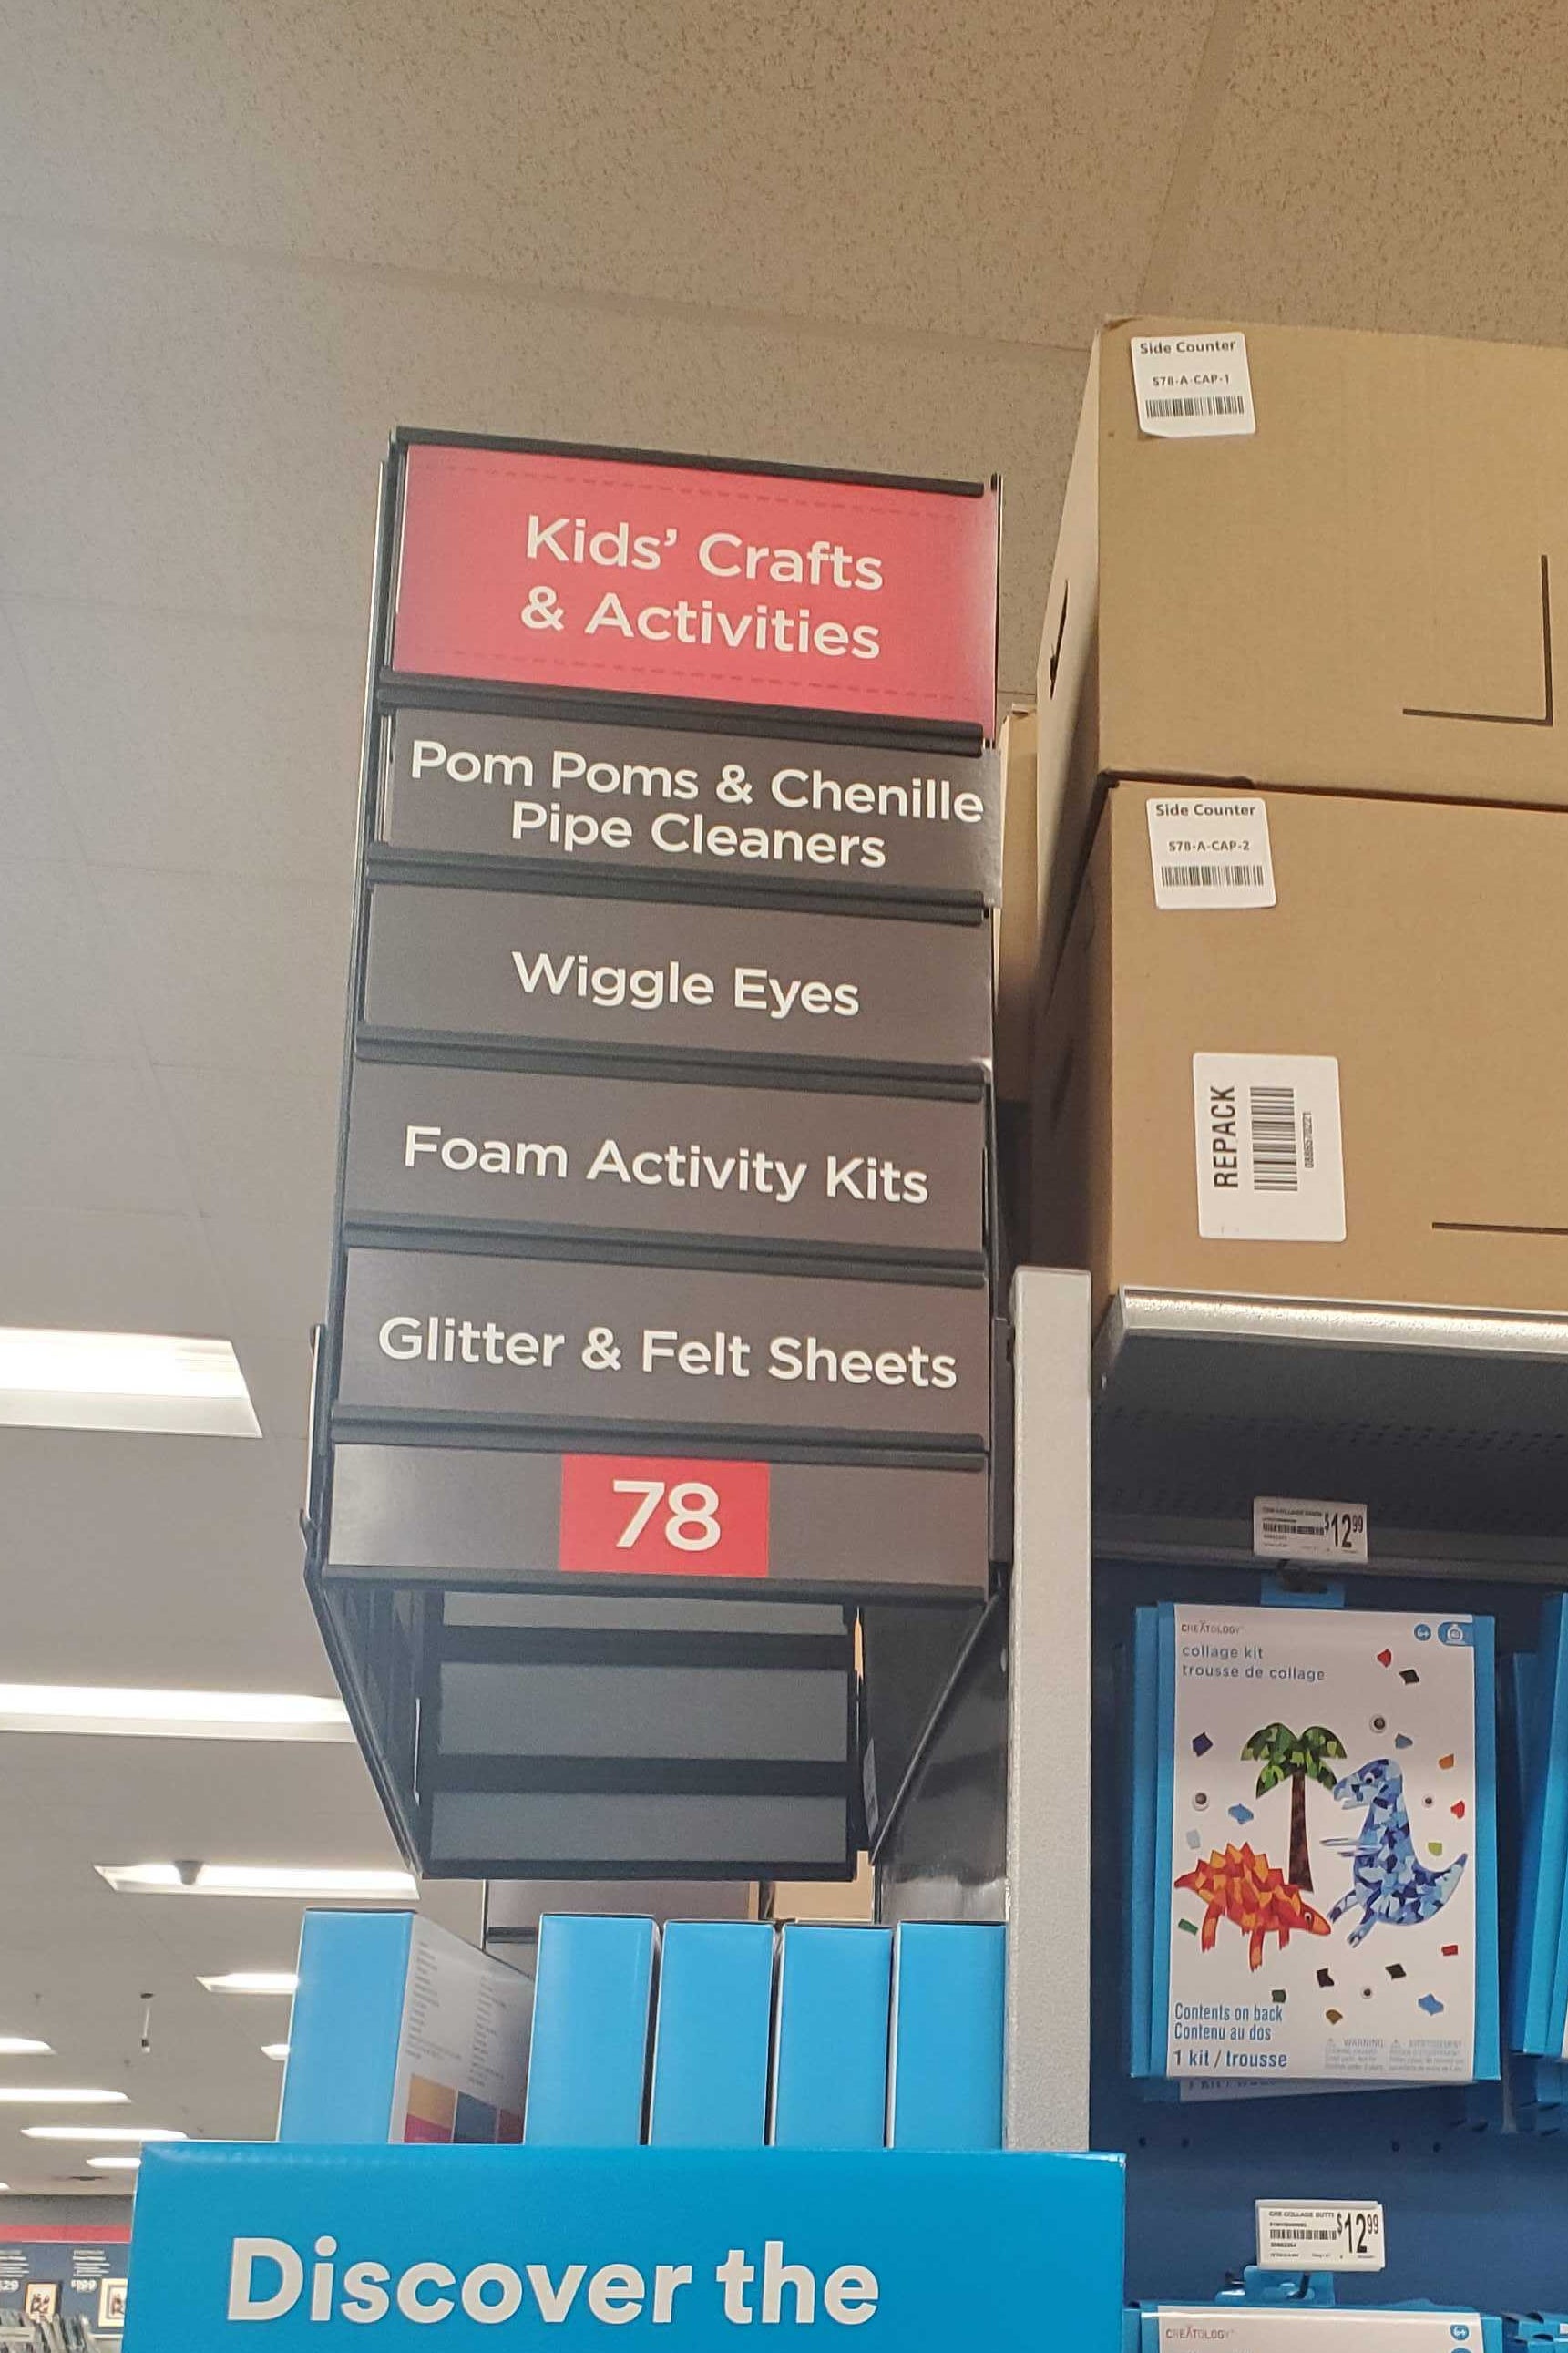 The sign for Aisle 78 at a Brooklyn Michaels, which lists "Wiggle Eyes" among its offerings.